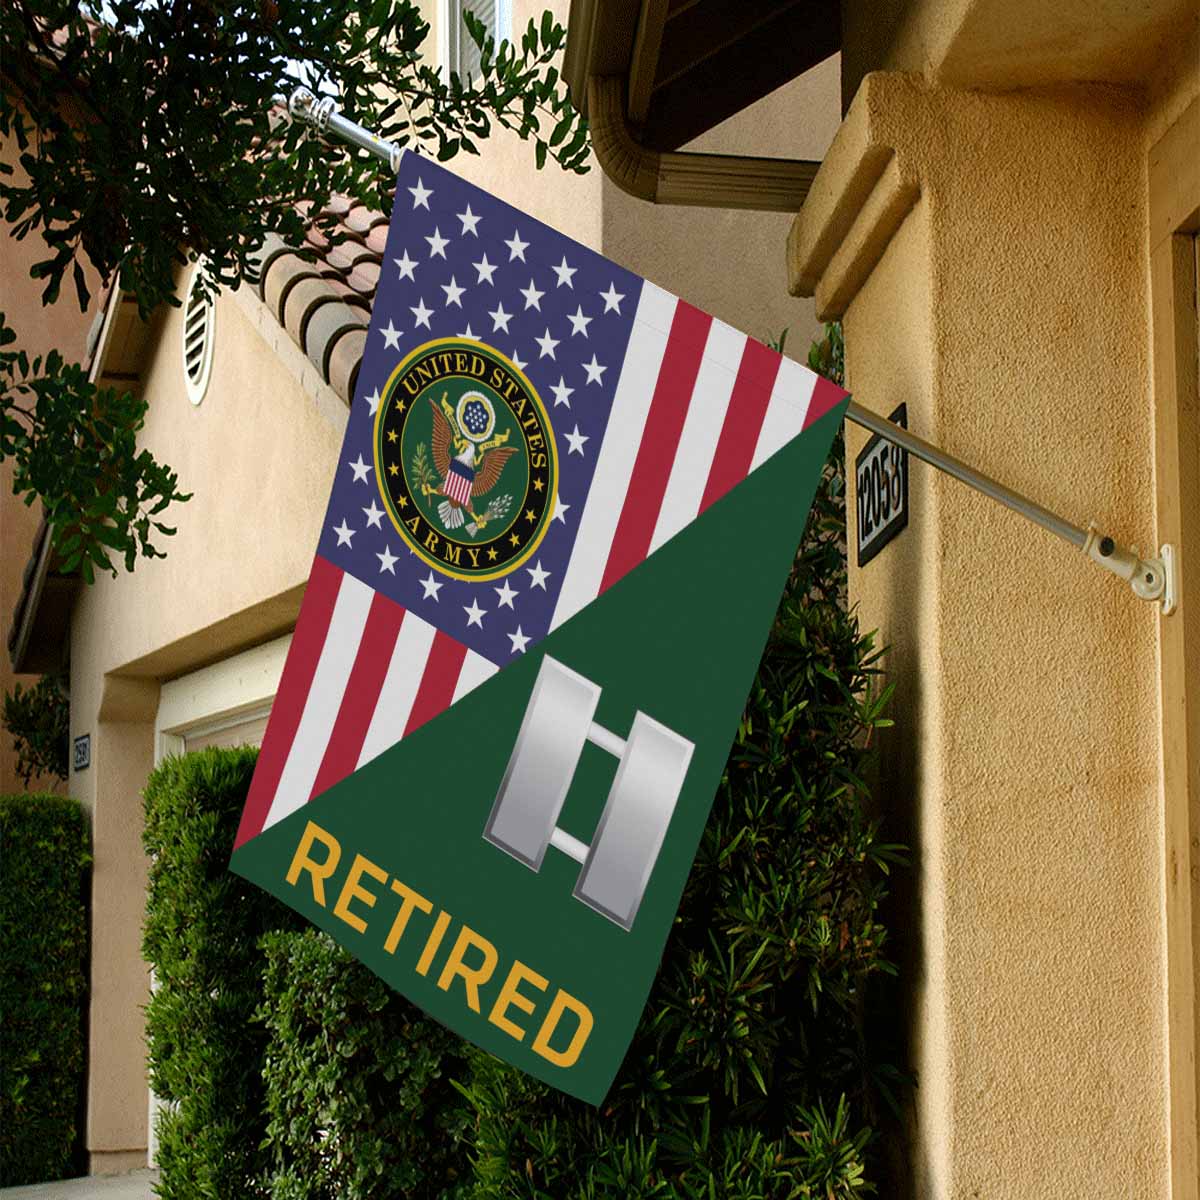 US Army O-3 Captain O3 CPT Retired House Flag 28 Inch x 40 Inch 2-Side Printing-HouseFlag-Army-Ranks-Veterans Nation